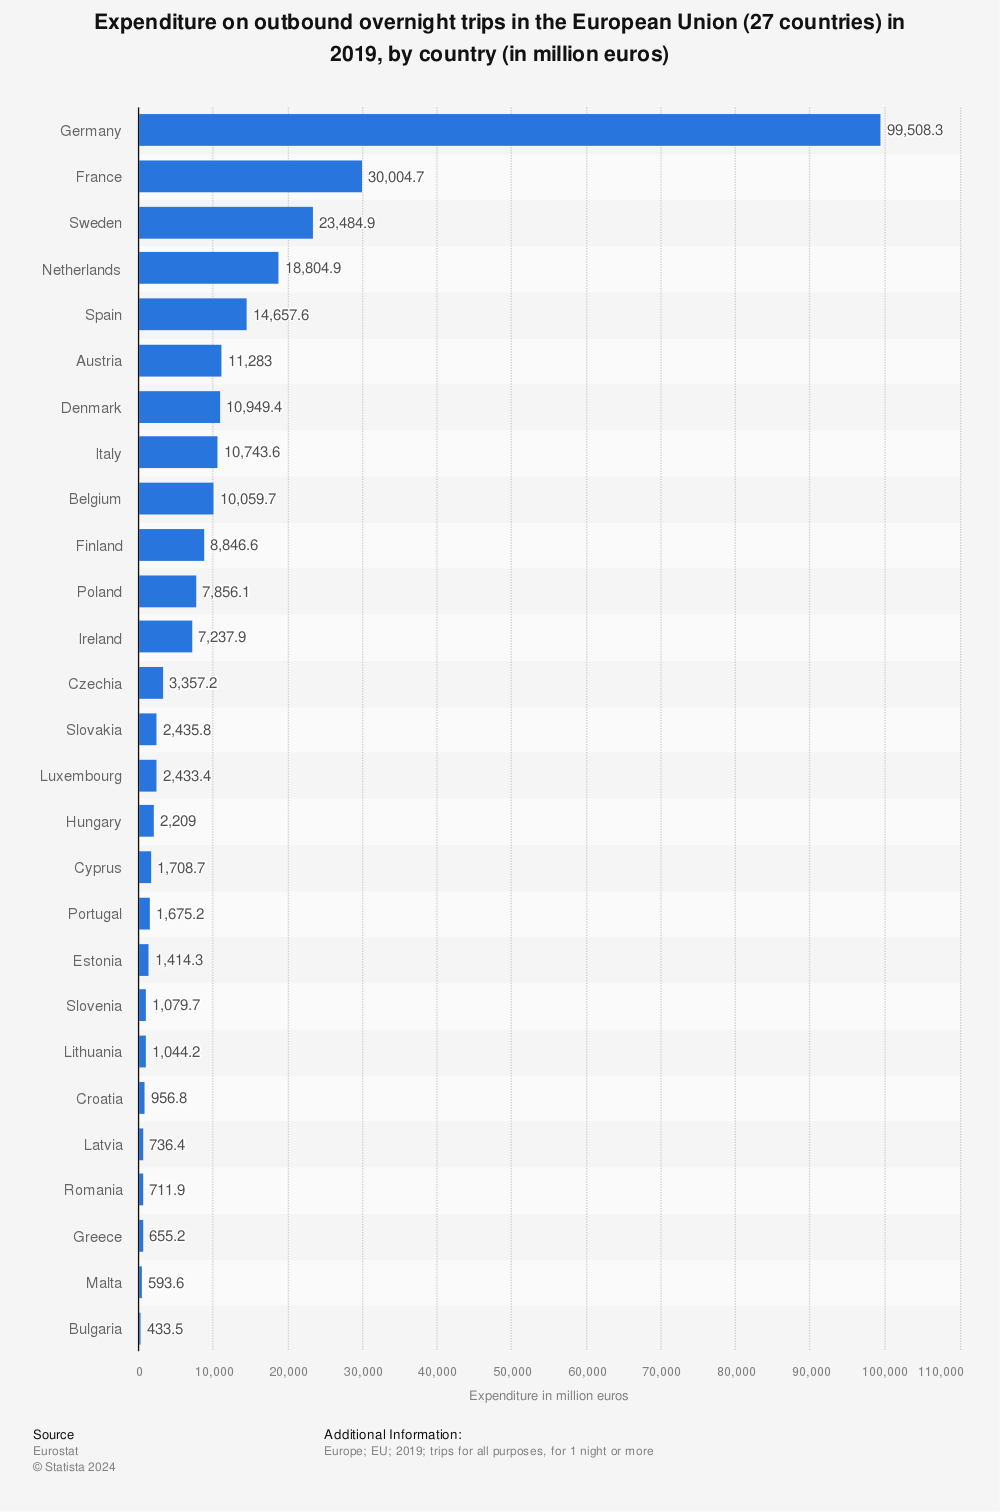 Statistic: Expenditure on outbound overnight trips in the European Union (27 countries) in 2019, by country (in million euros) | Statista